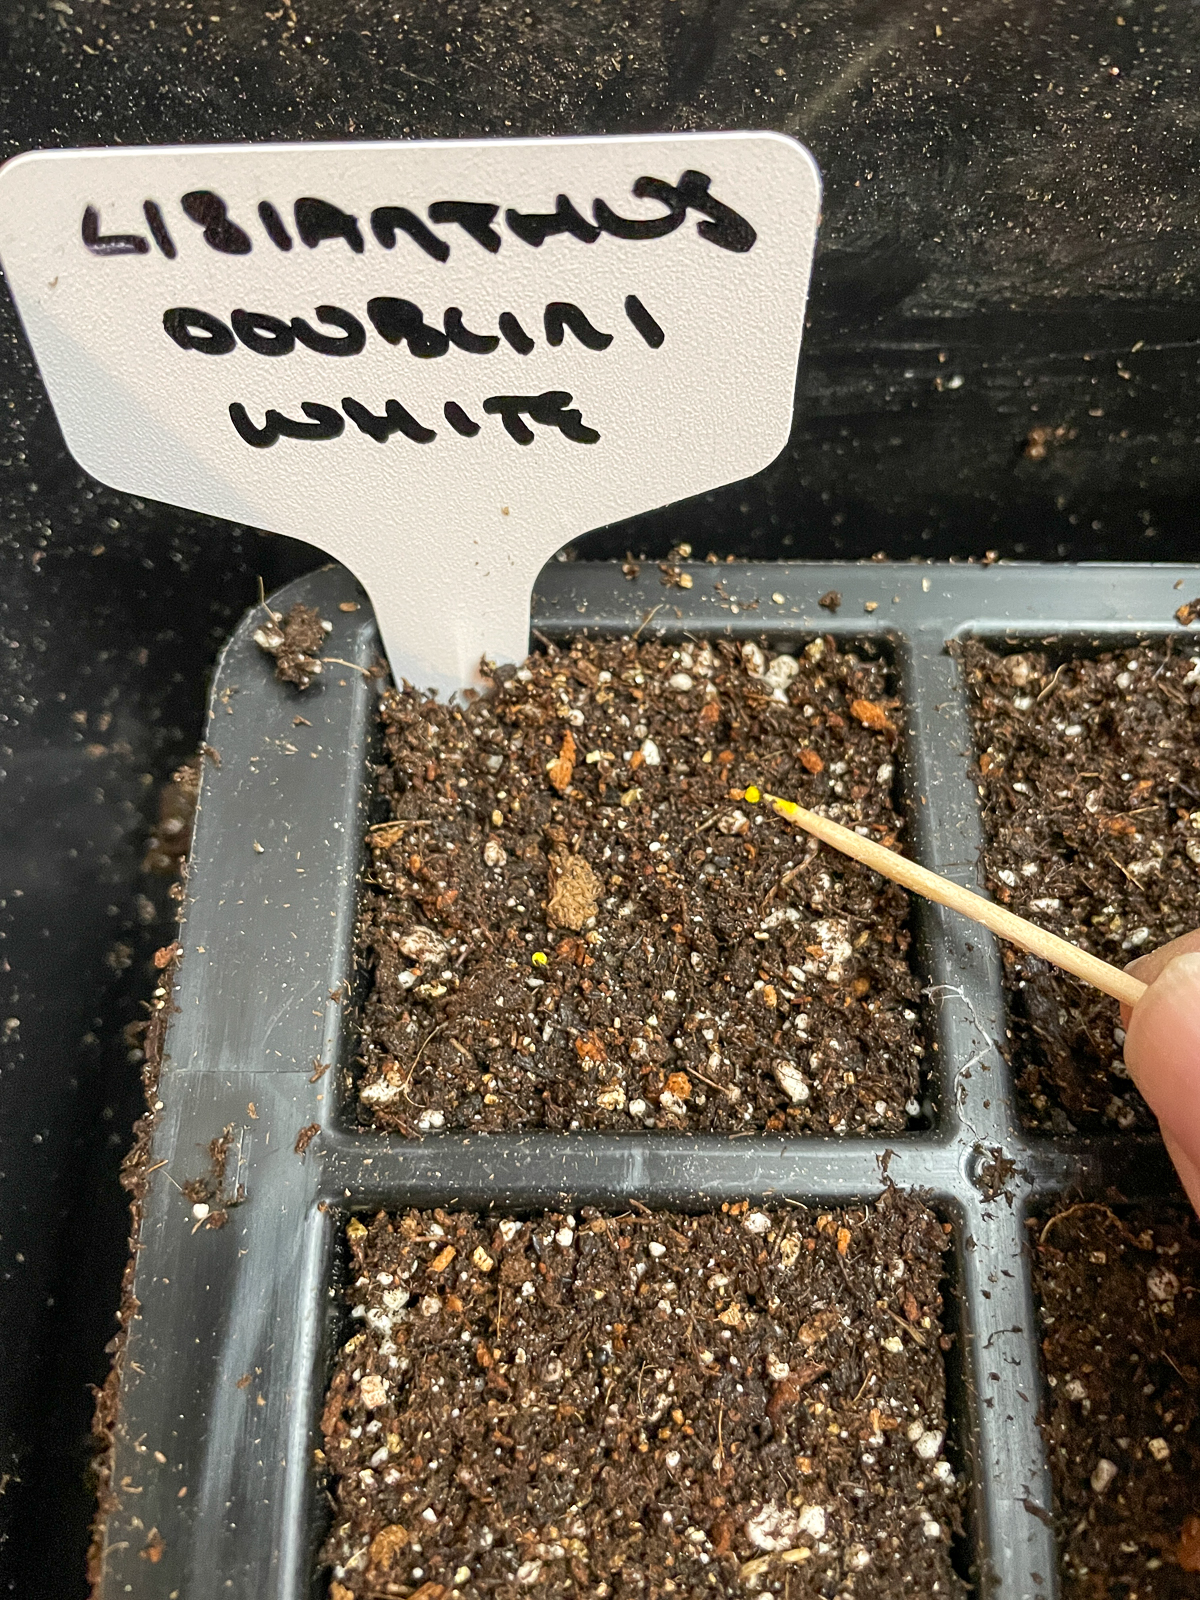 planting a lisianthus seed in a seed tray